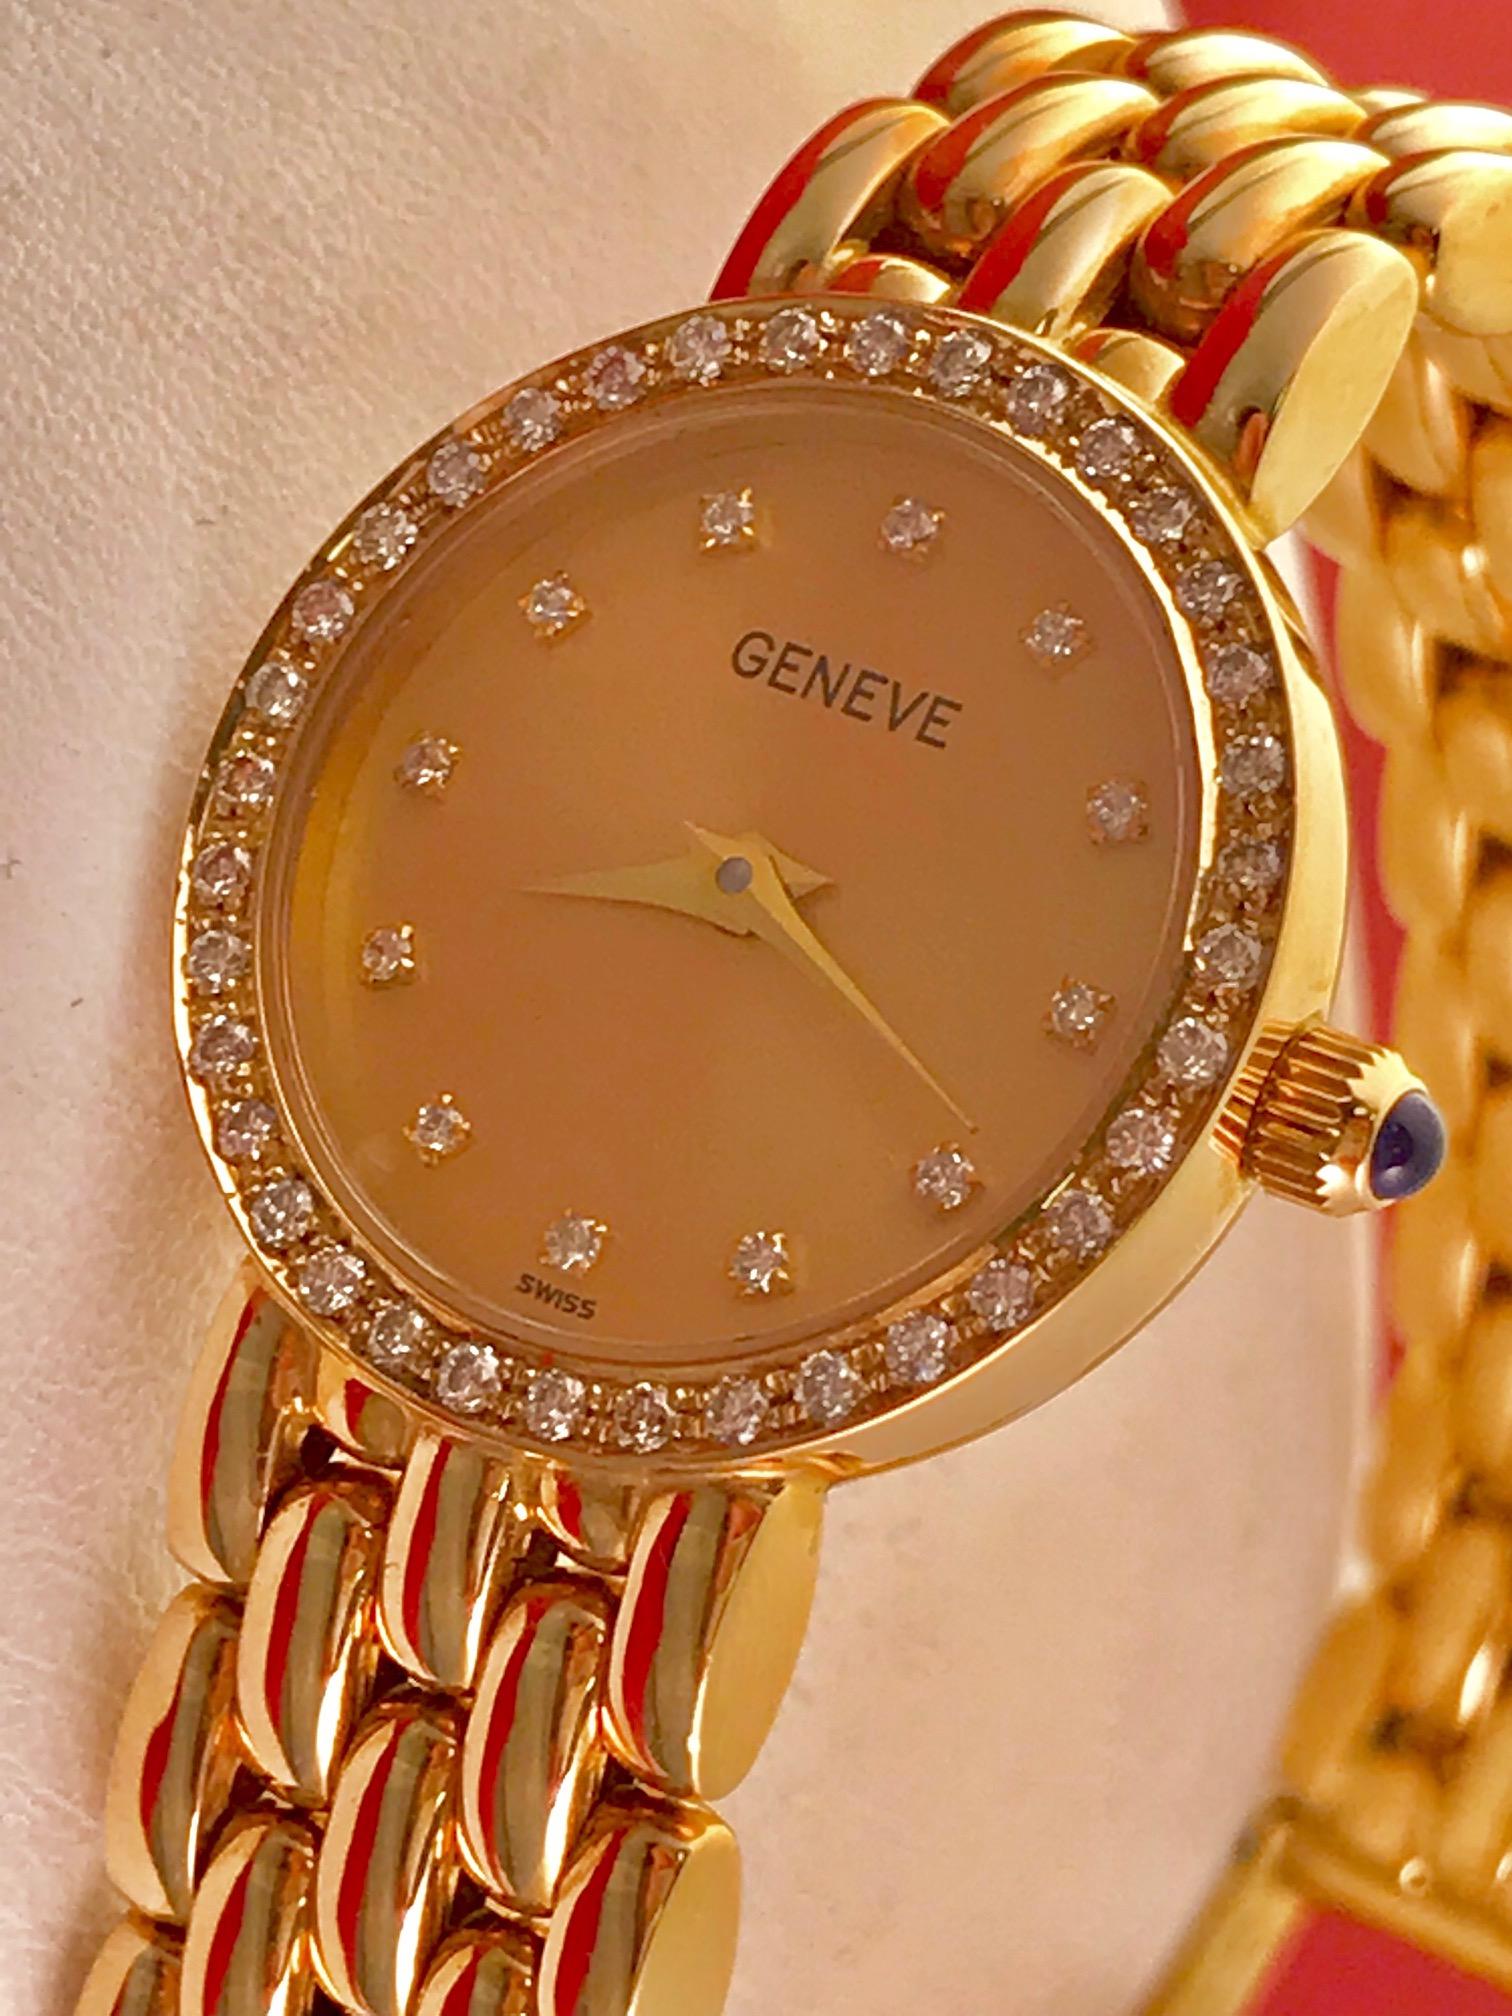 Genève Ladies wrist watch in 14k yellow gold with diamond bezel. This Gevève Ladies wrist watch has an all 14k gold bracelet with full links and hidden deployant clasp. Powered by a Swiss quartz movement. This watch is in 